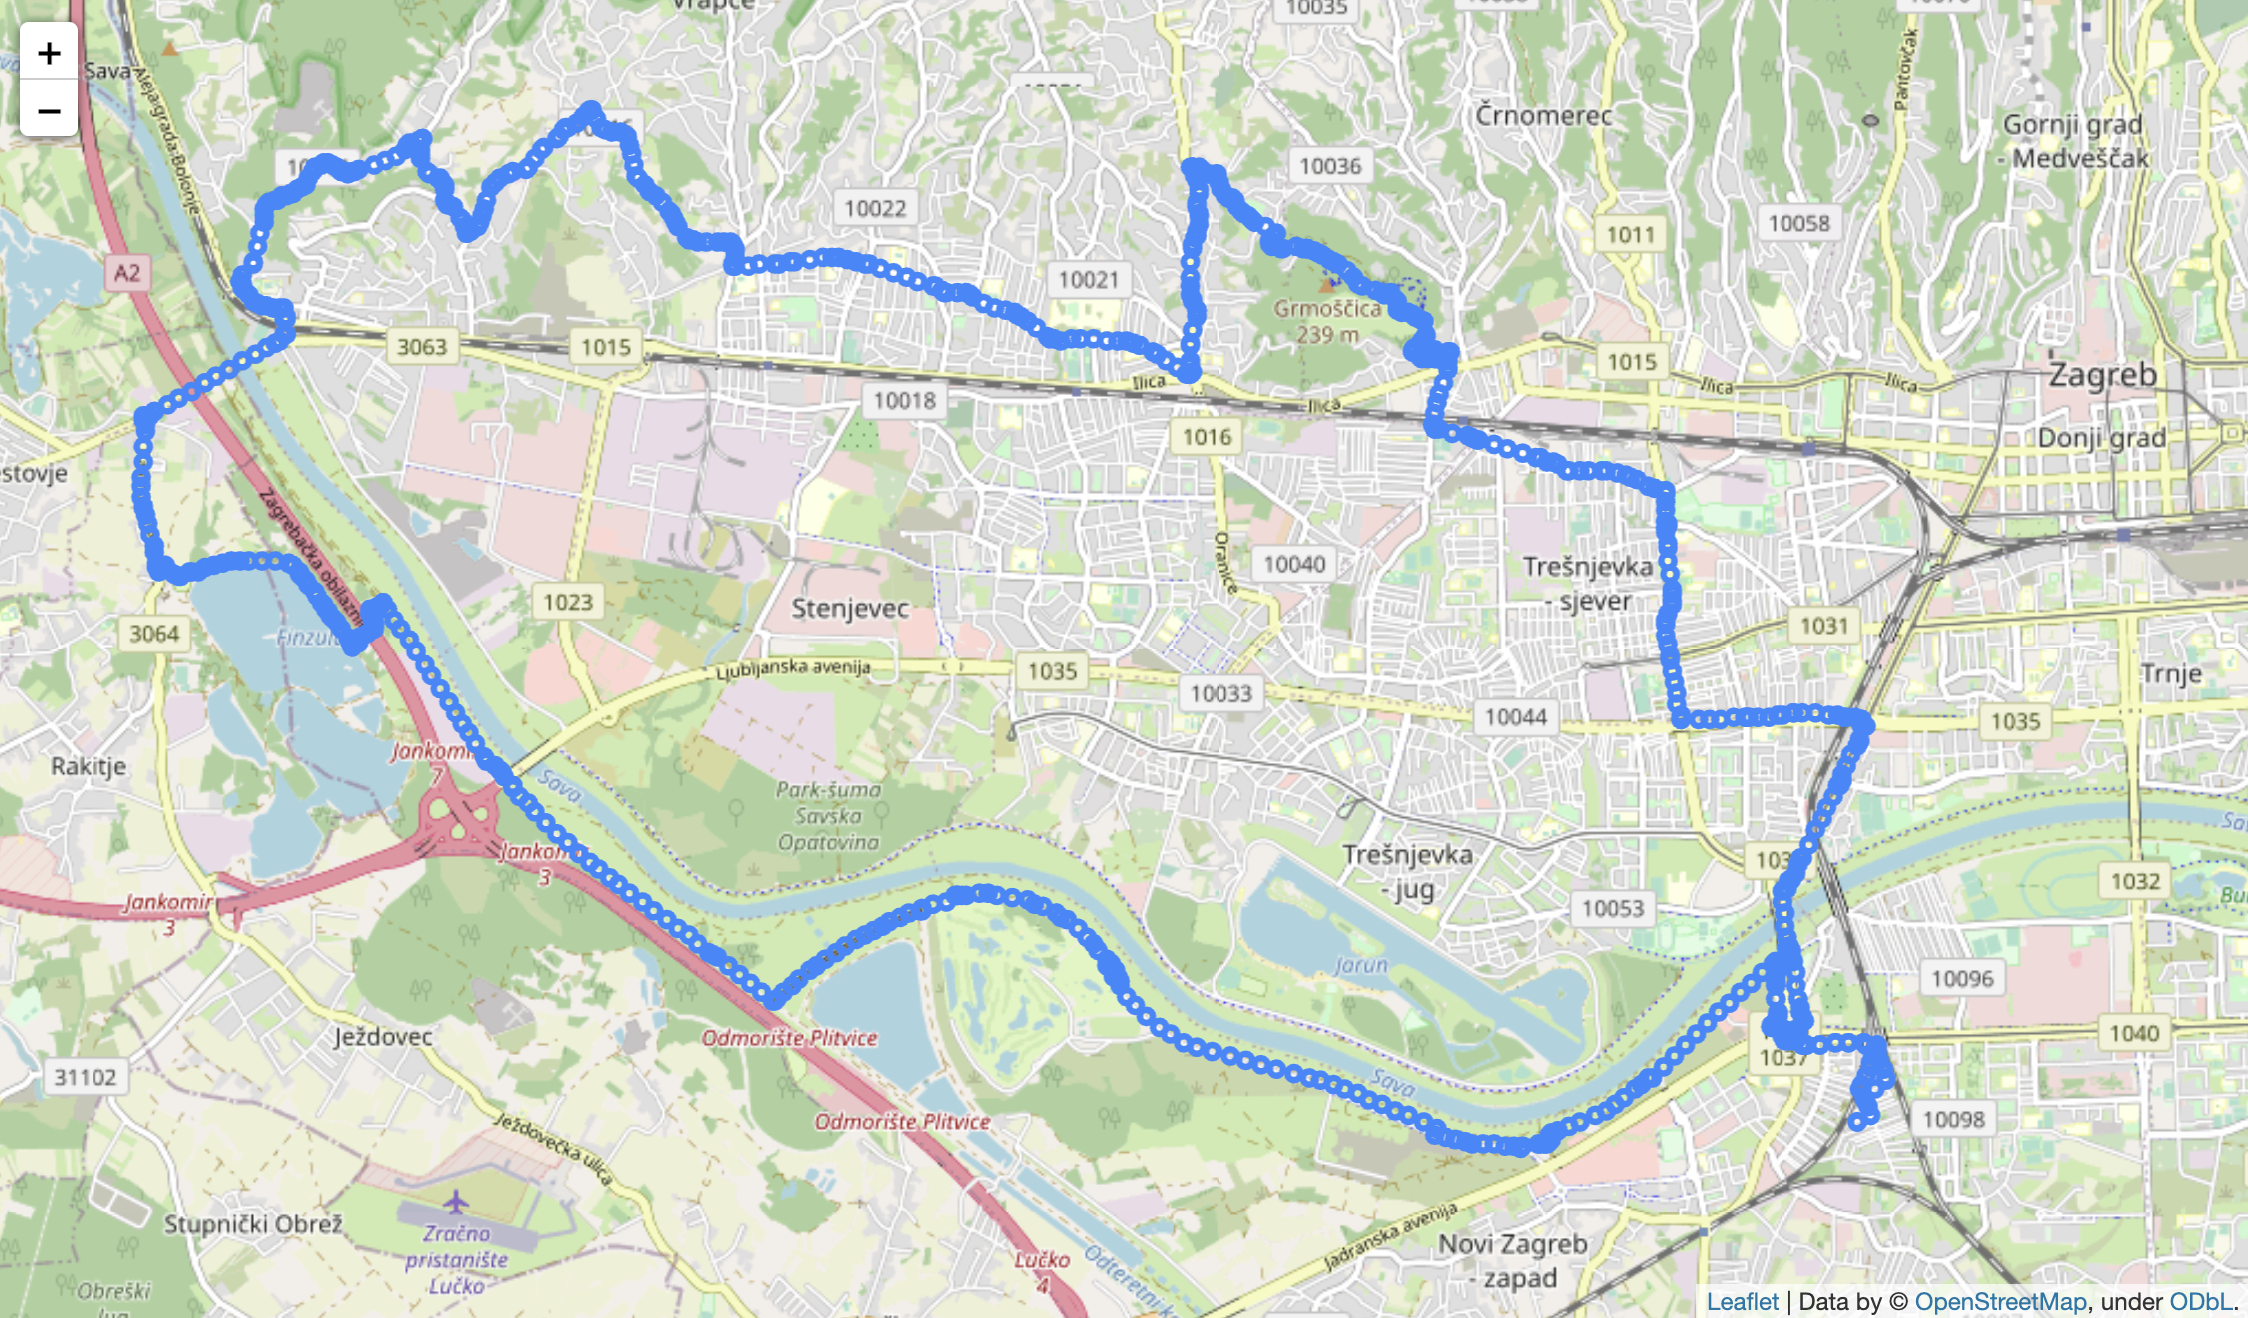 Image 4 - Visualizing Strava route with circle markers (image by author)